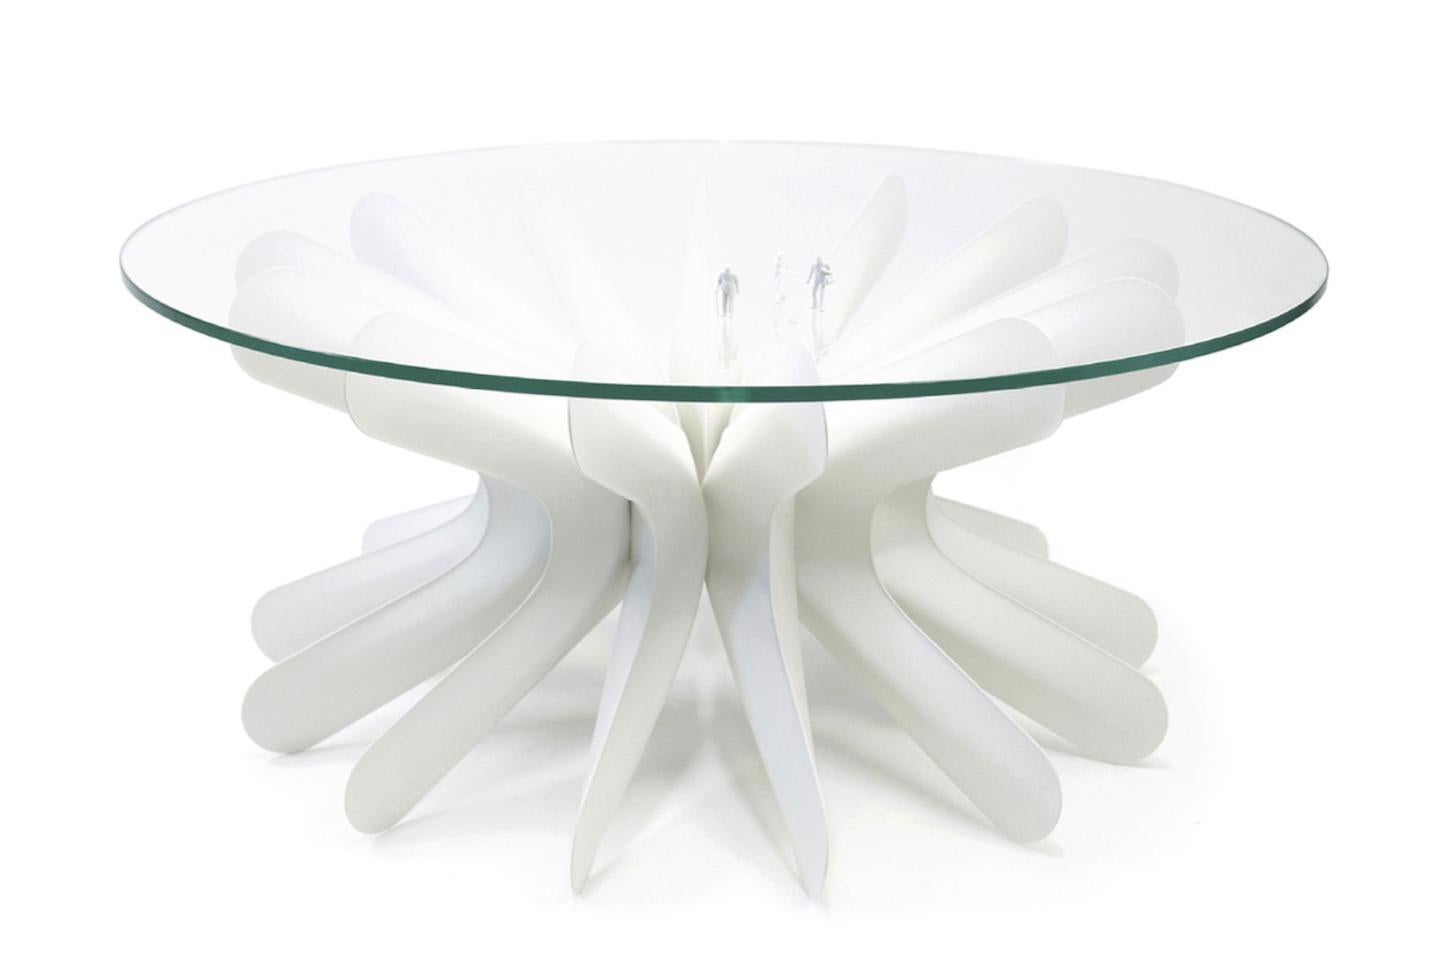 Organic Modern Contemporary Dining Table 'Steel in Rotation No. 1' by Zieta, Stainless Steel For Sale